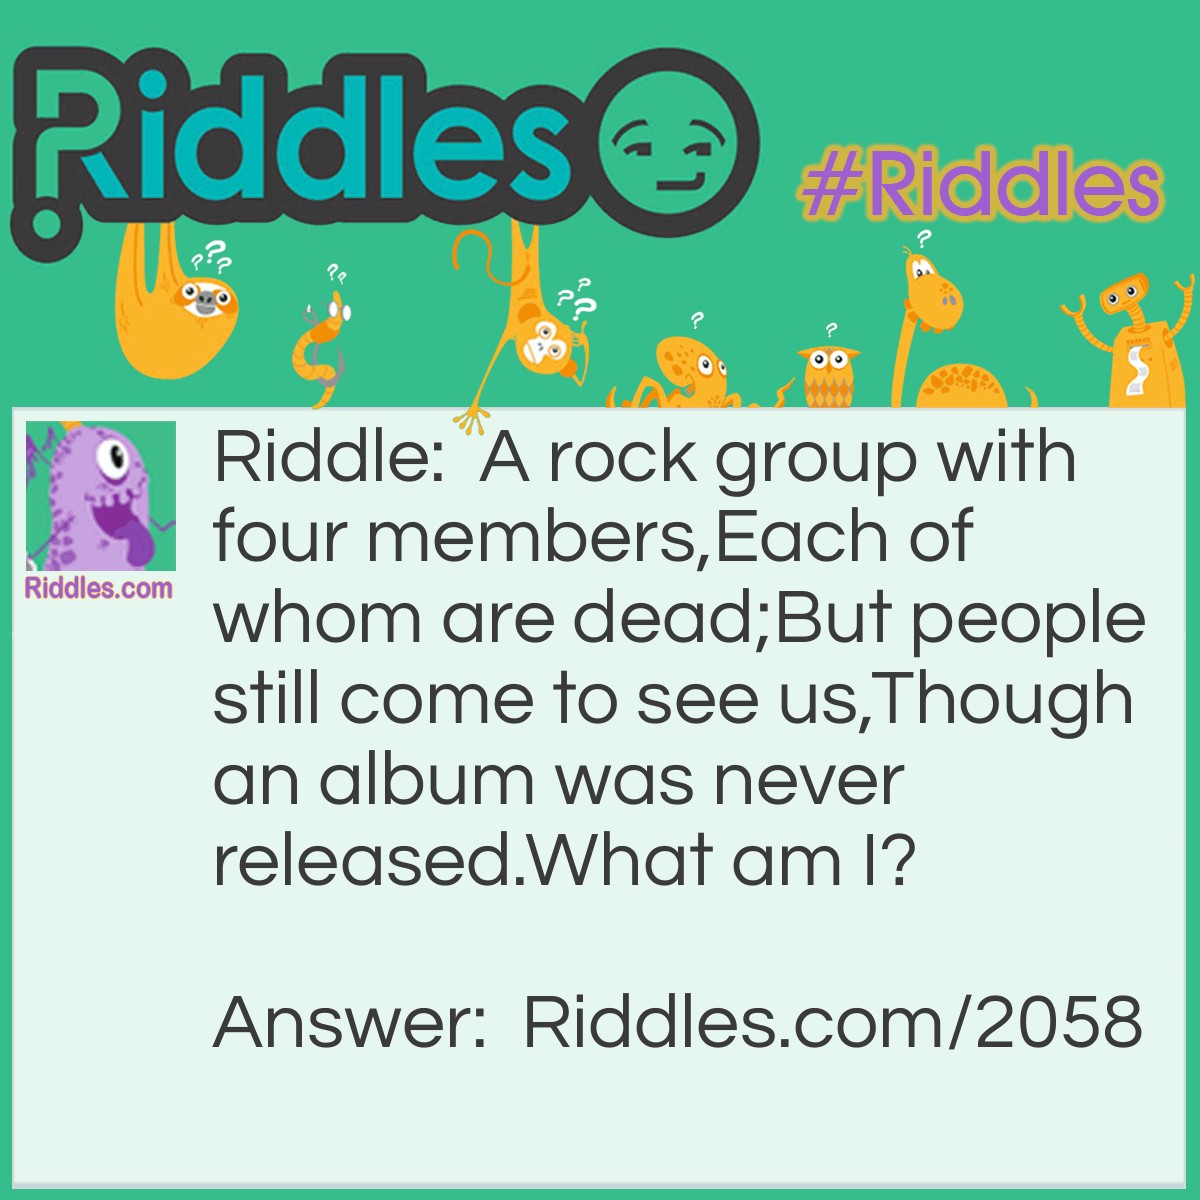 Riddle: A rock group with four members,
Each of whom are dead;
But people still come to see us,
Though an album was never released.
What am I? Answer: Mt. Rushmore